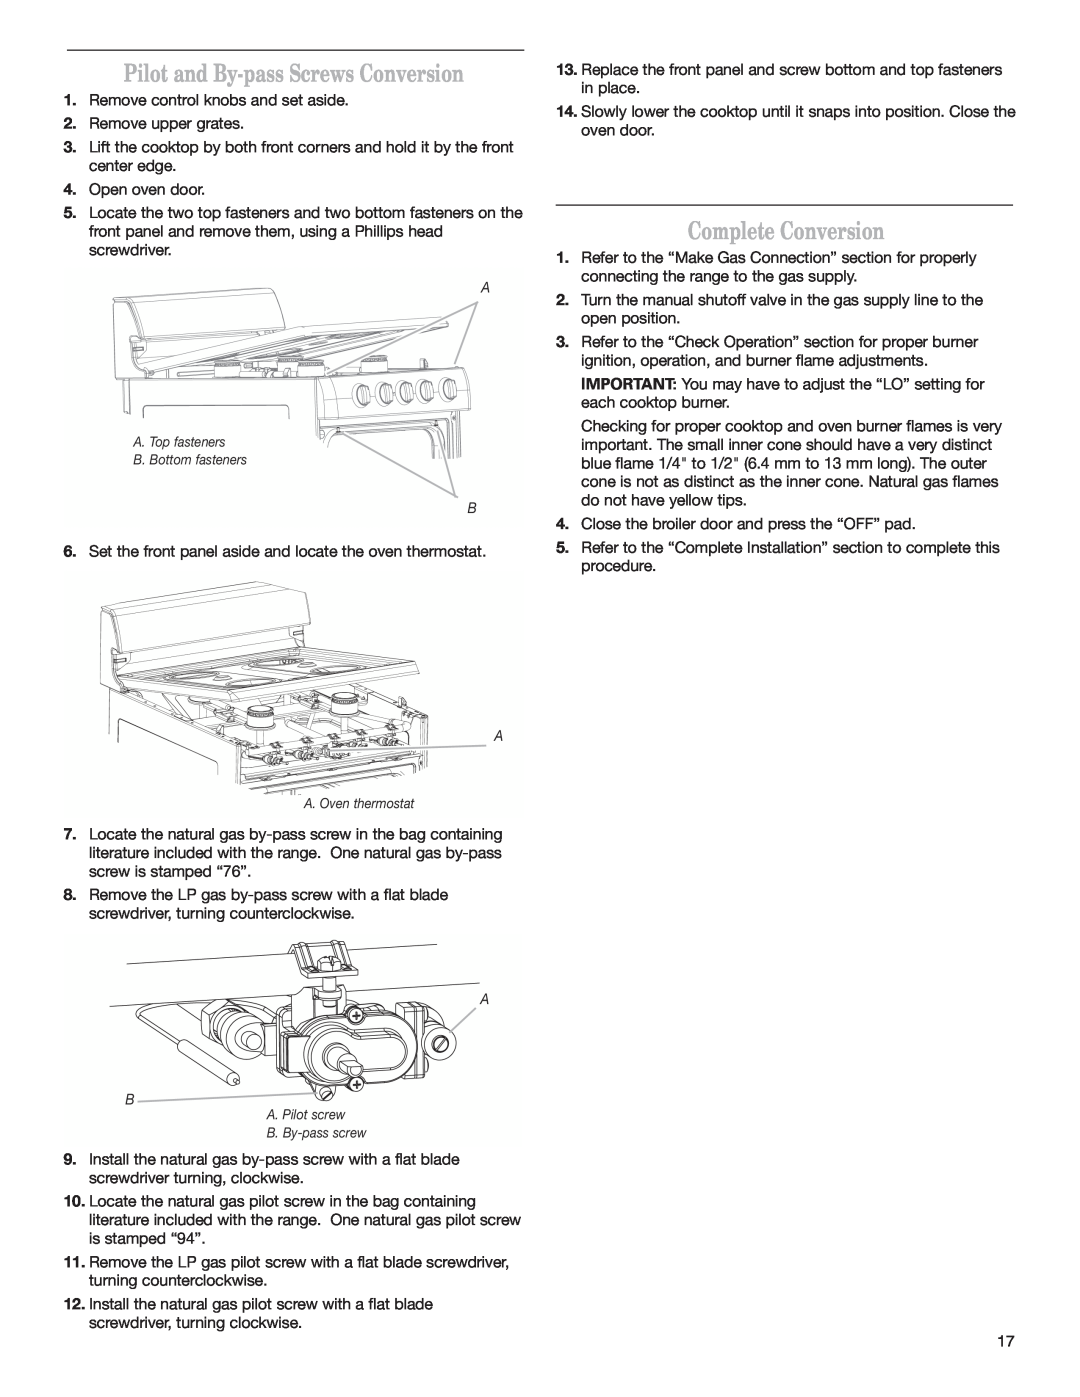 Whirlpool W10173324B installation instructions Pilot and By-pass Screws Conversion, Complete Conversion 